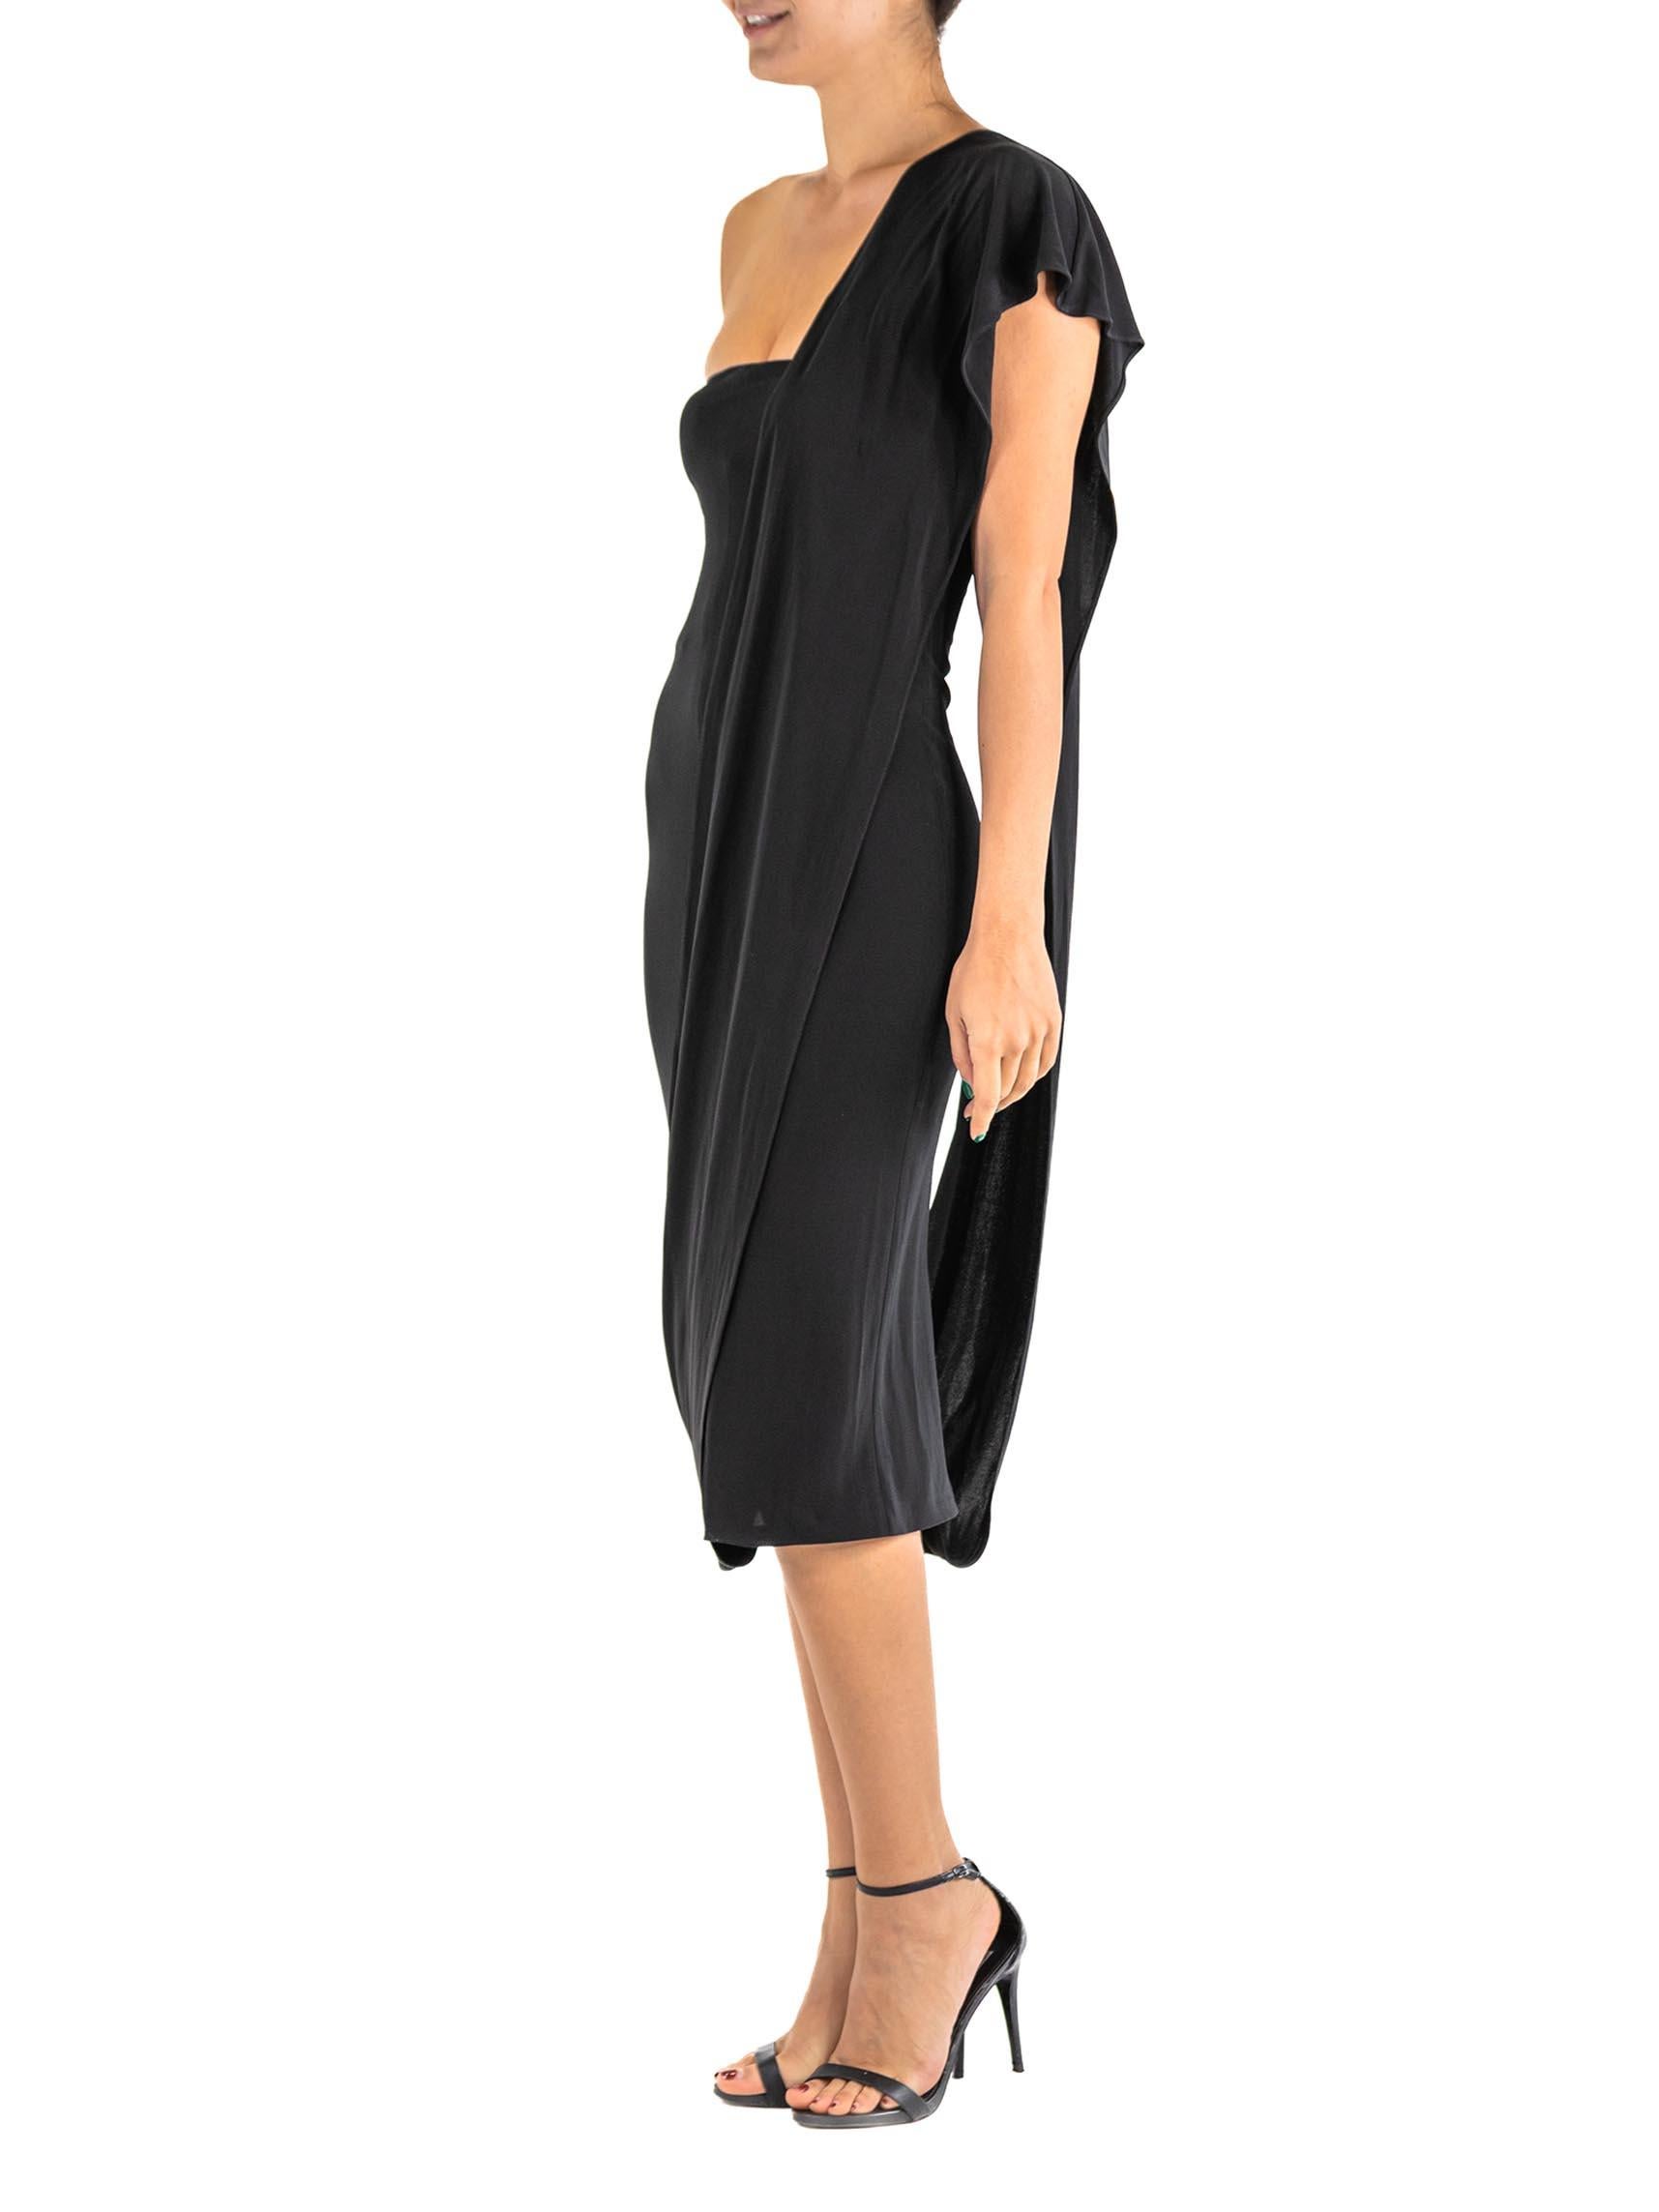 1990S HERVE LEGER Black Rayon Blend Strapless Dress With One Shoulder Sash In Excellent Condition For Sale In New York, NY